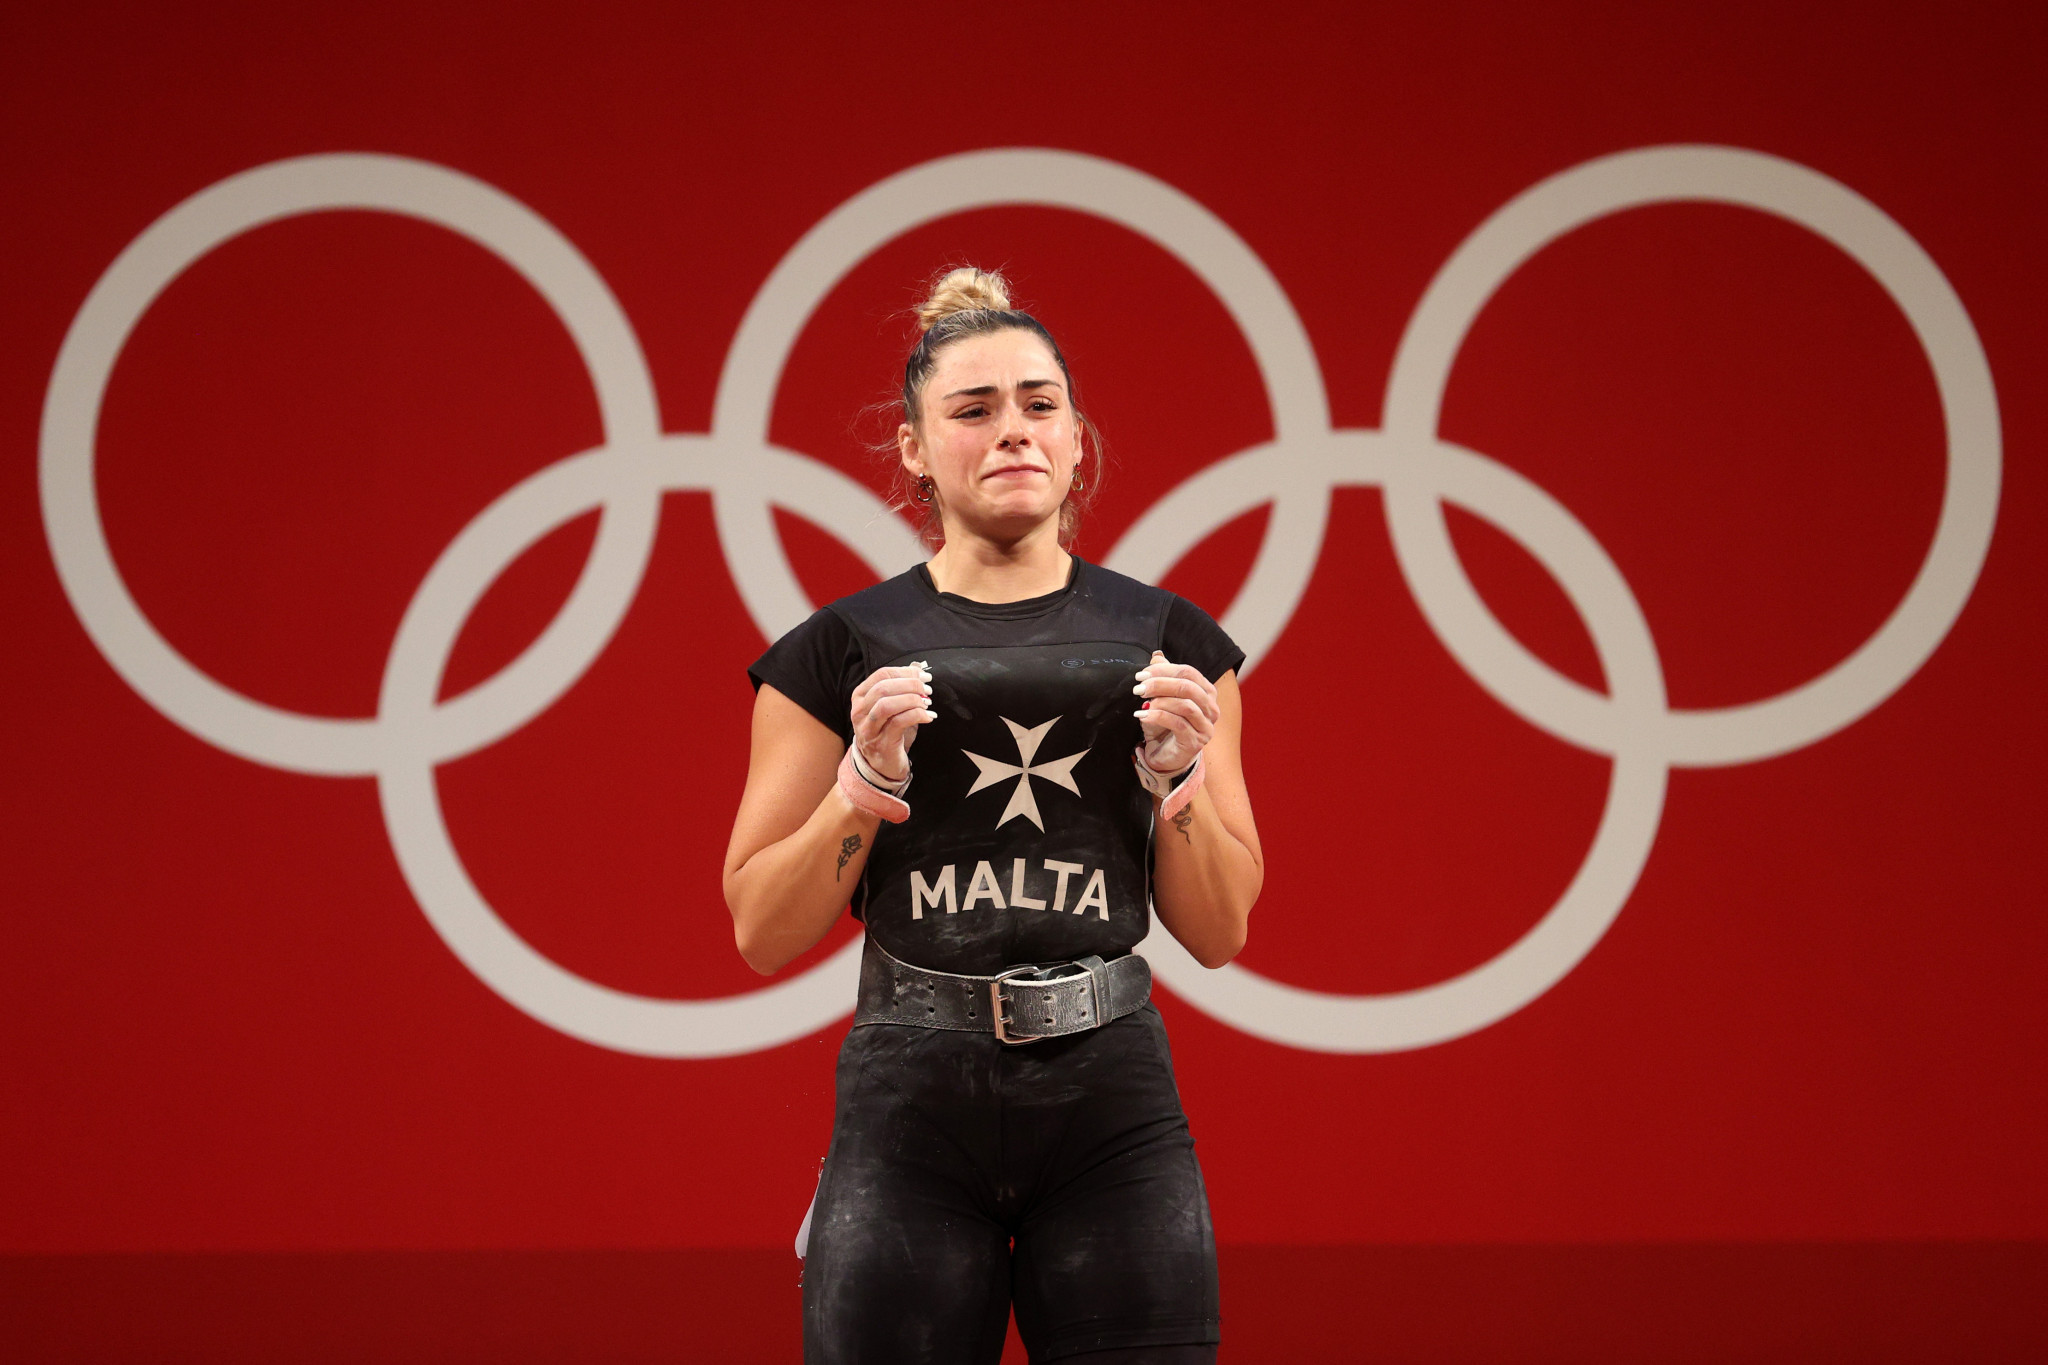 Yasmin Stevens is one of the IWF's new athlete ambassadors ©Getty Images